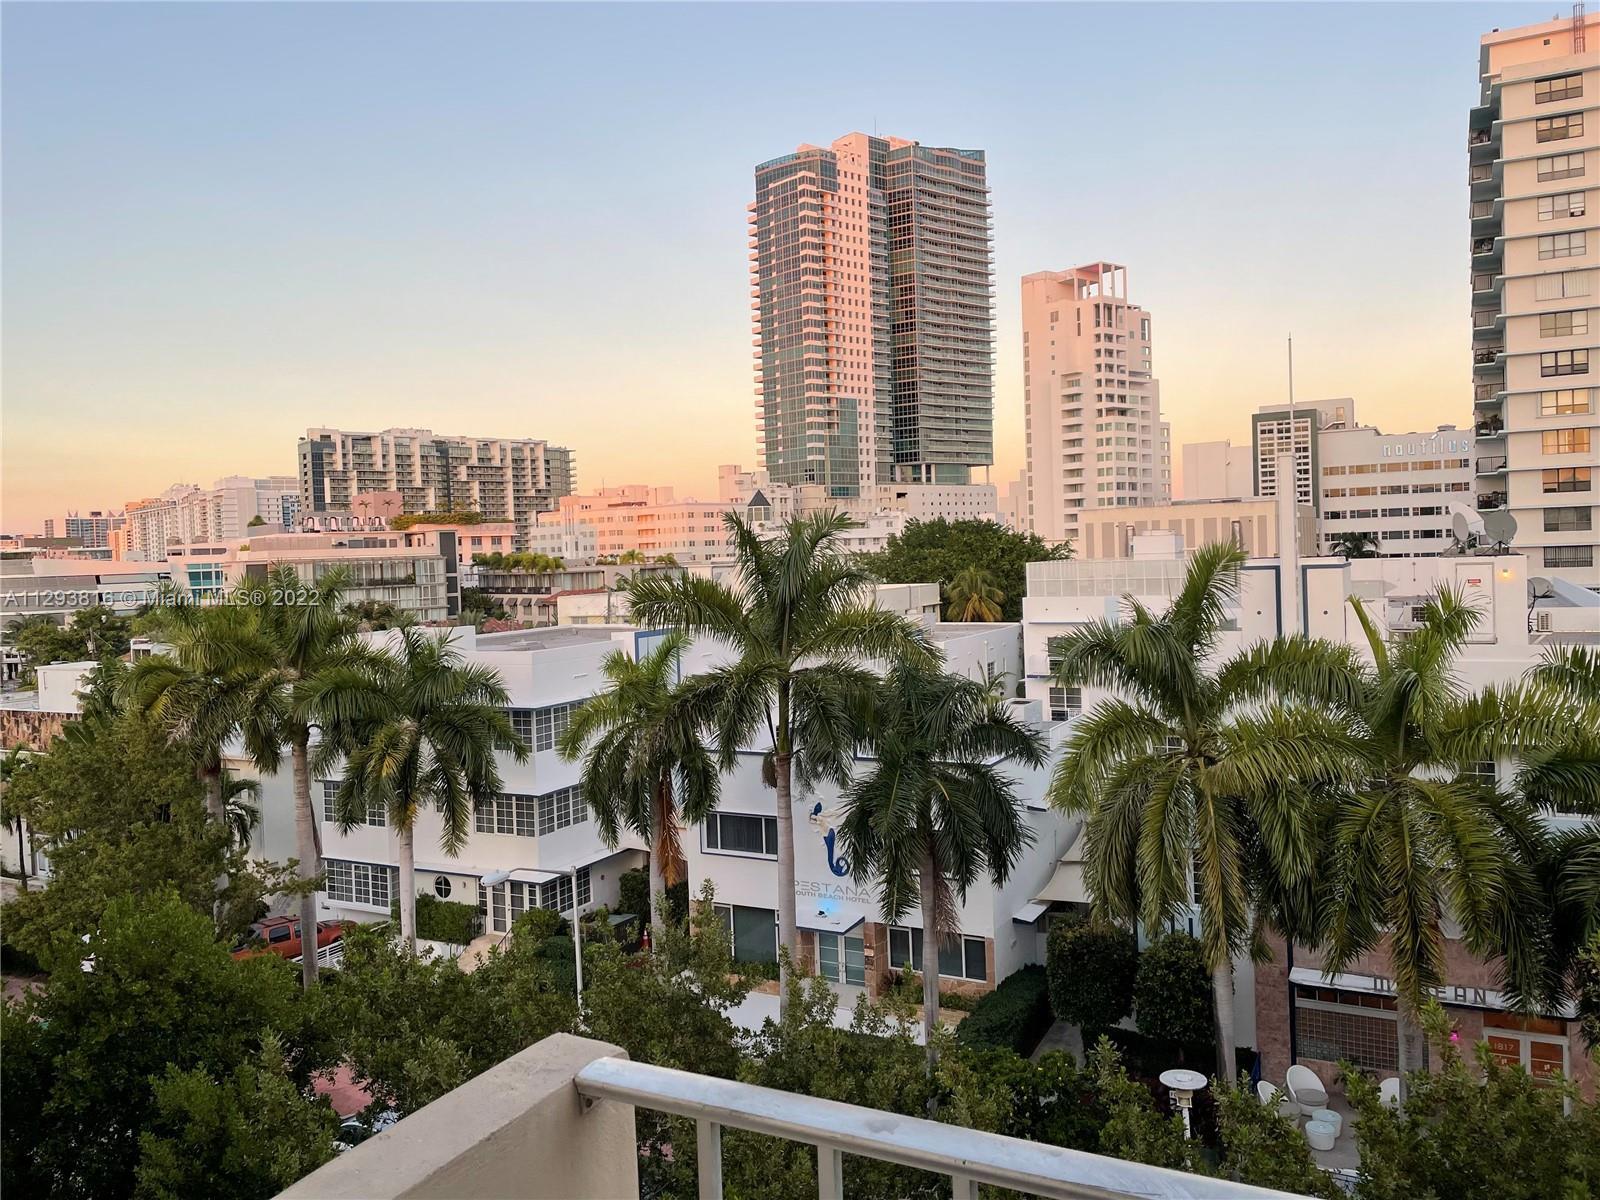 Great 2 Bedroom/1 Bathroom Condo located in the Heart of South Beach. Building is a 55+ and rentals 